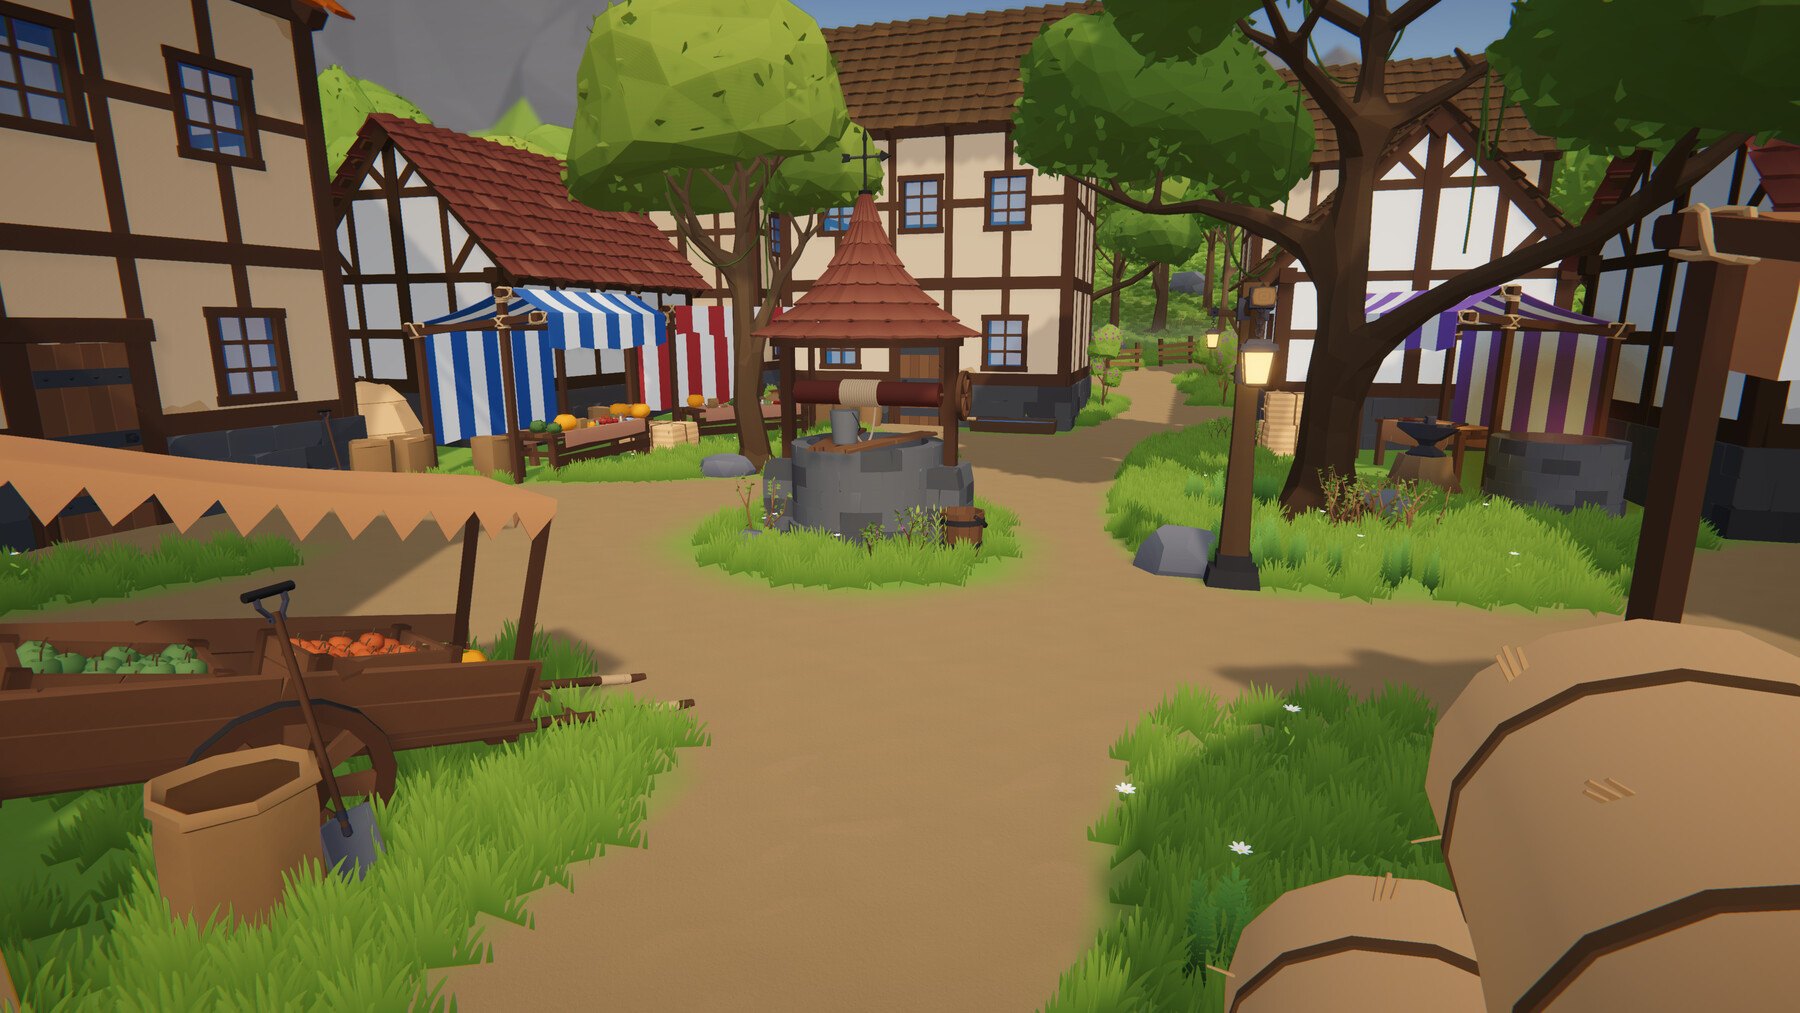 ArtStation - Low Poly Fantasy Valley - Asset for Unity 3D, Map and ...